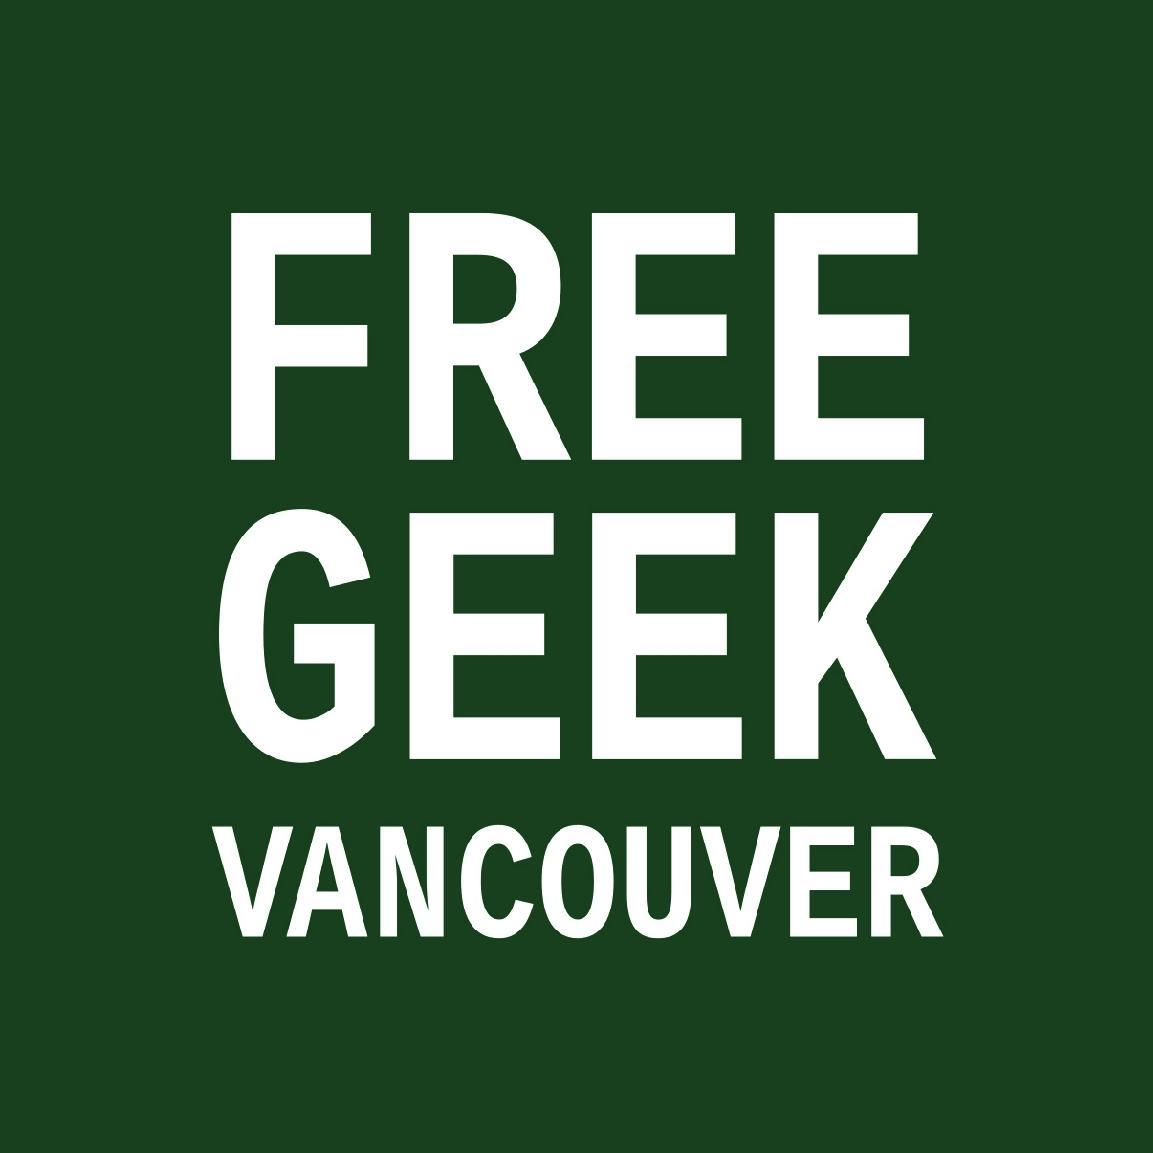 Free Geek Vancouver Donation pick up service